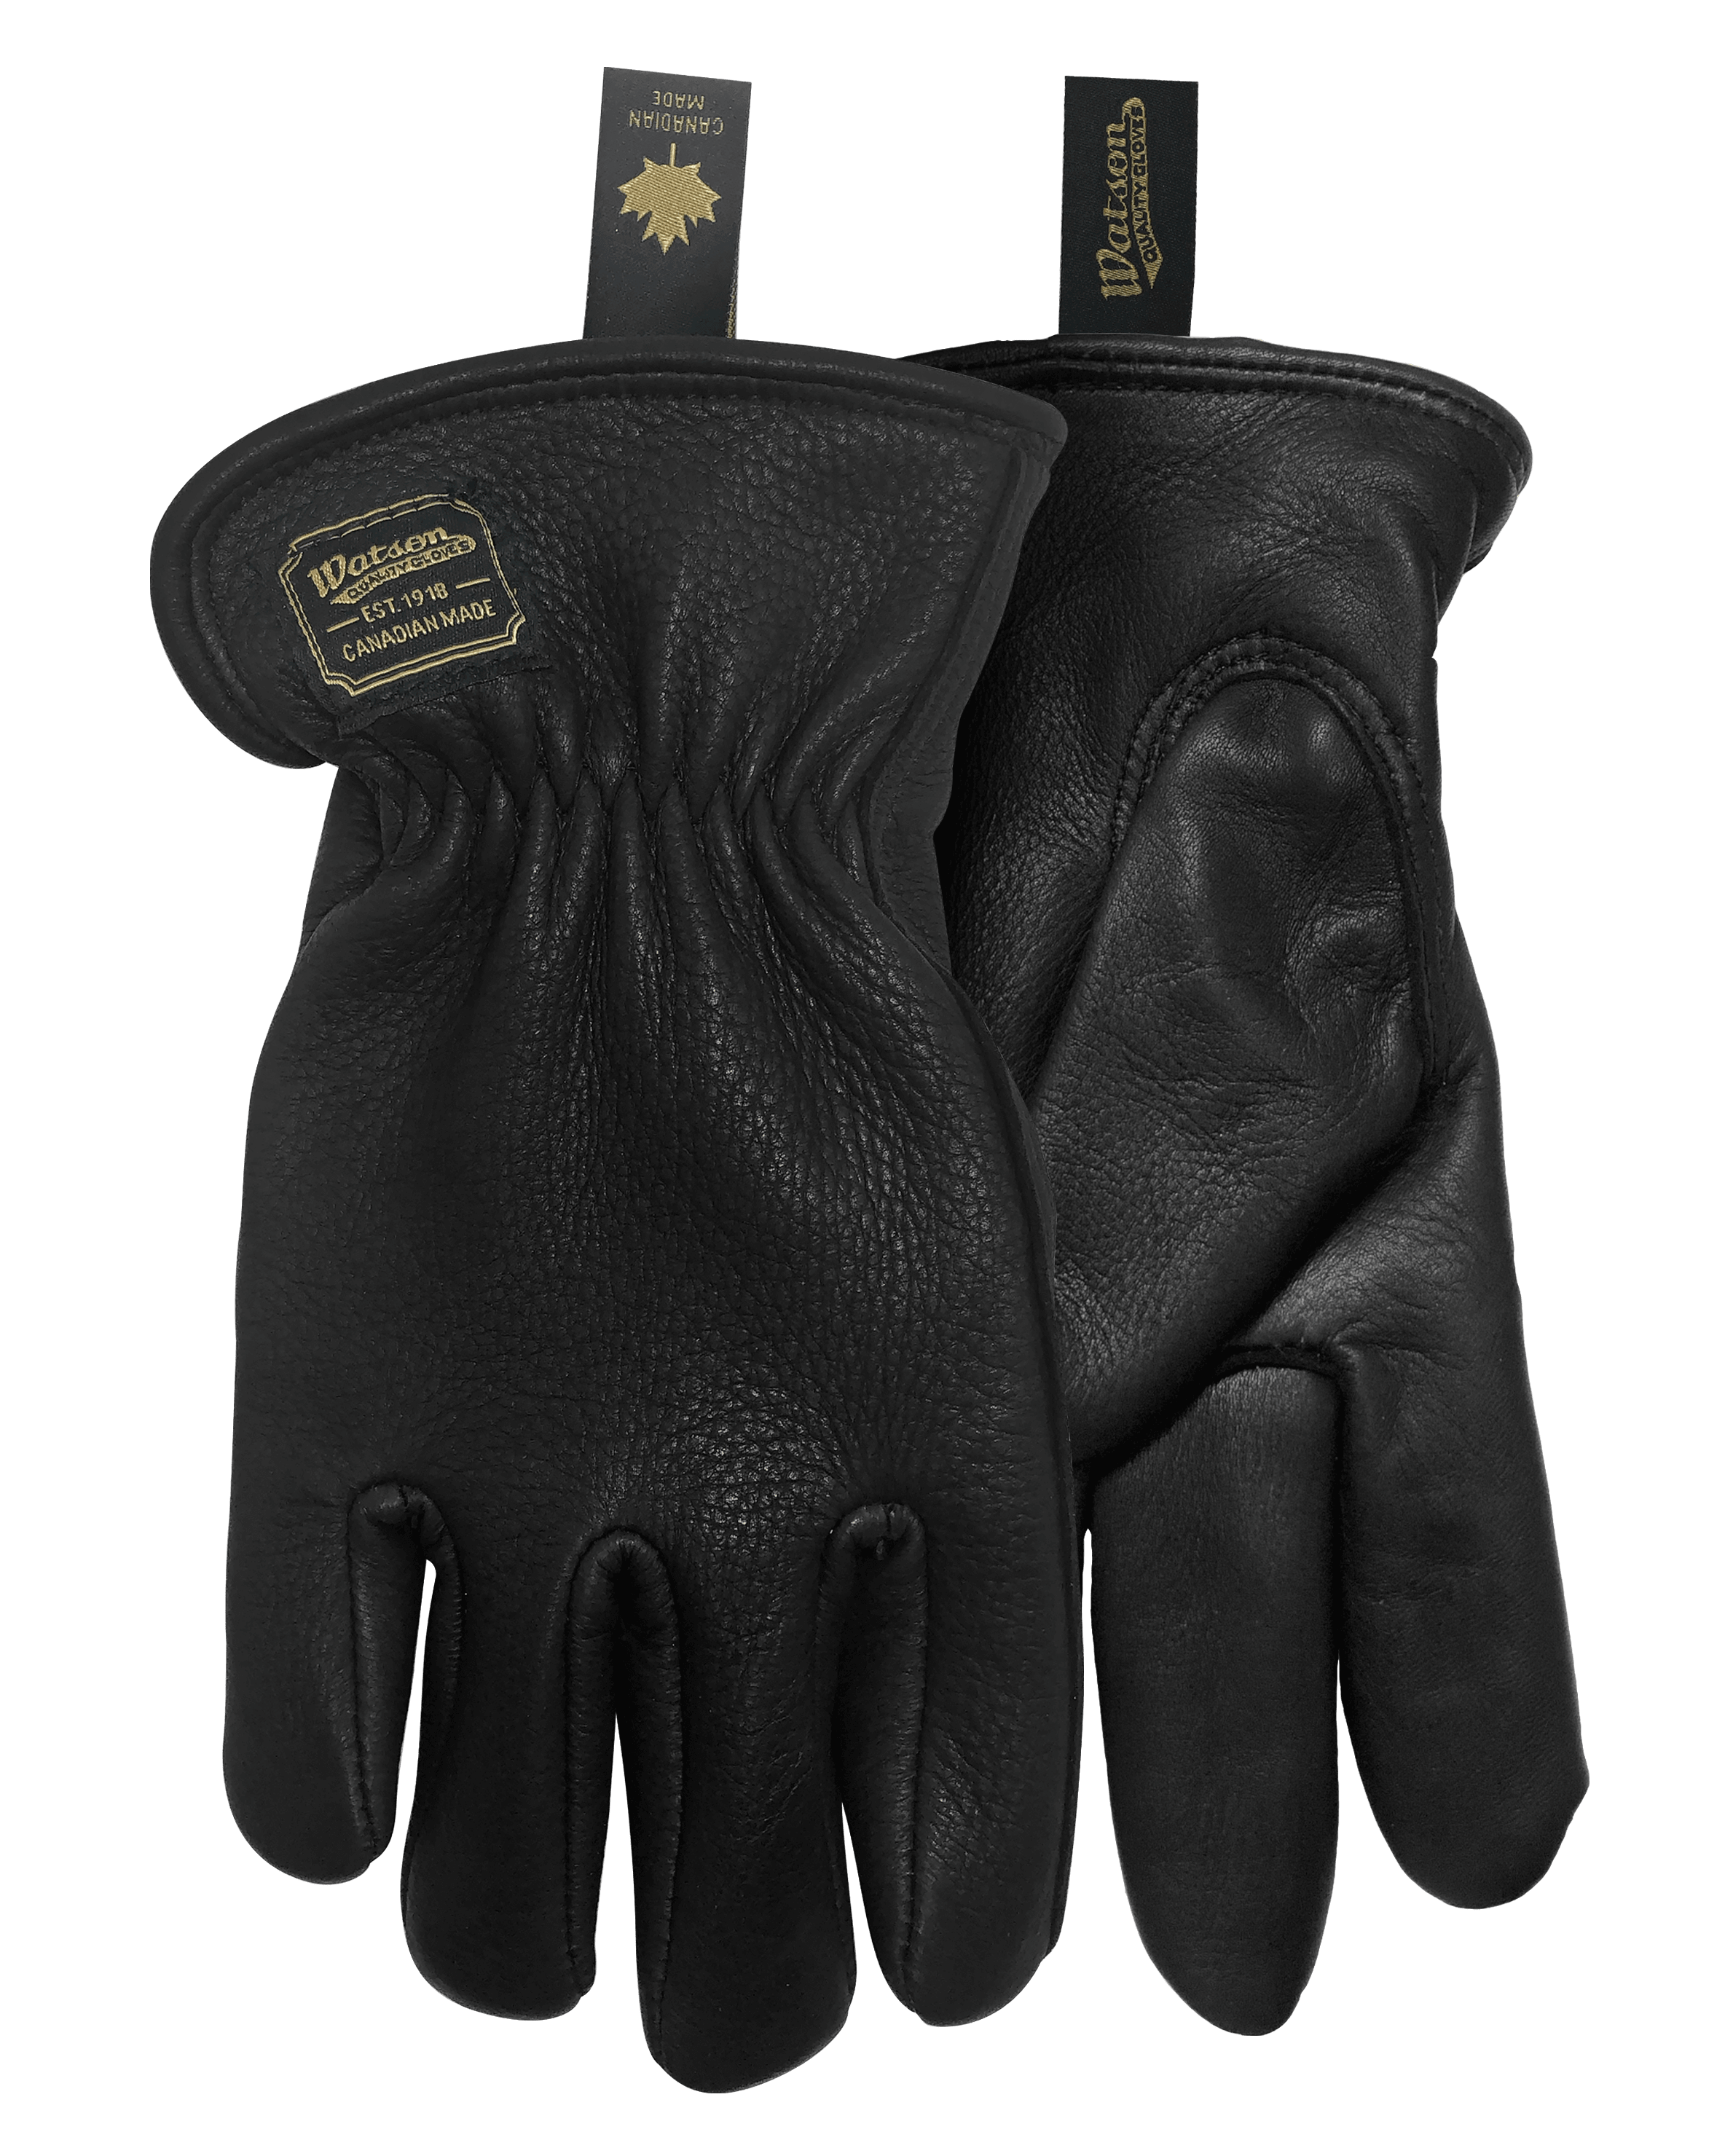 The Duchess Lined Premium Leather Driver Style Gloves, Black